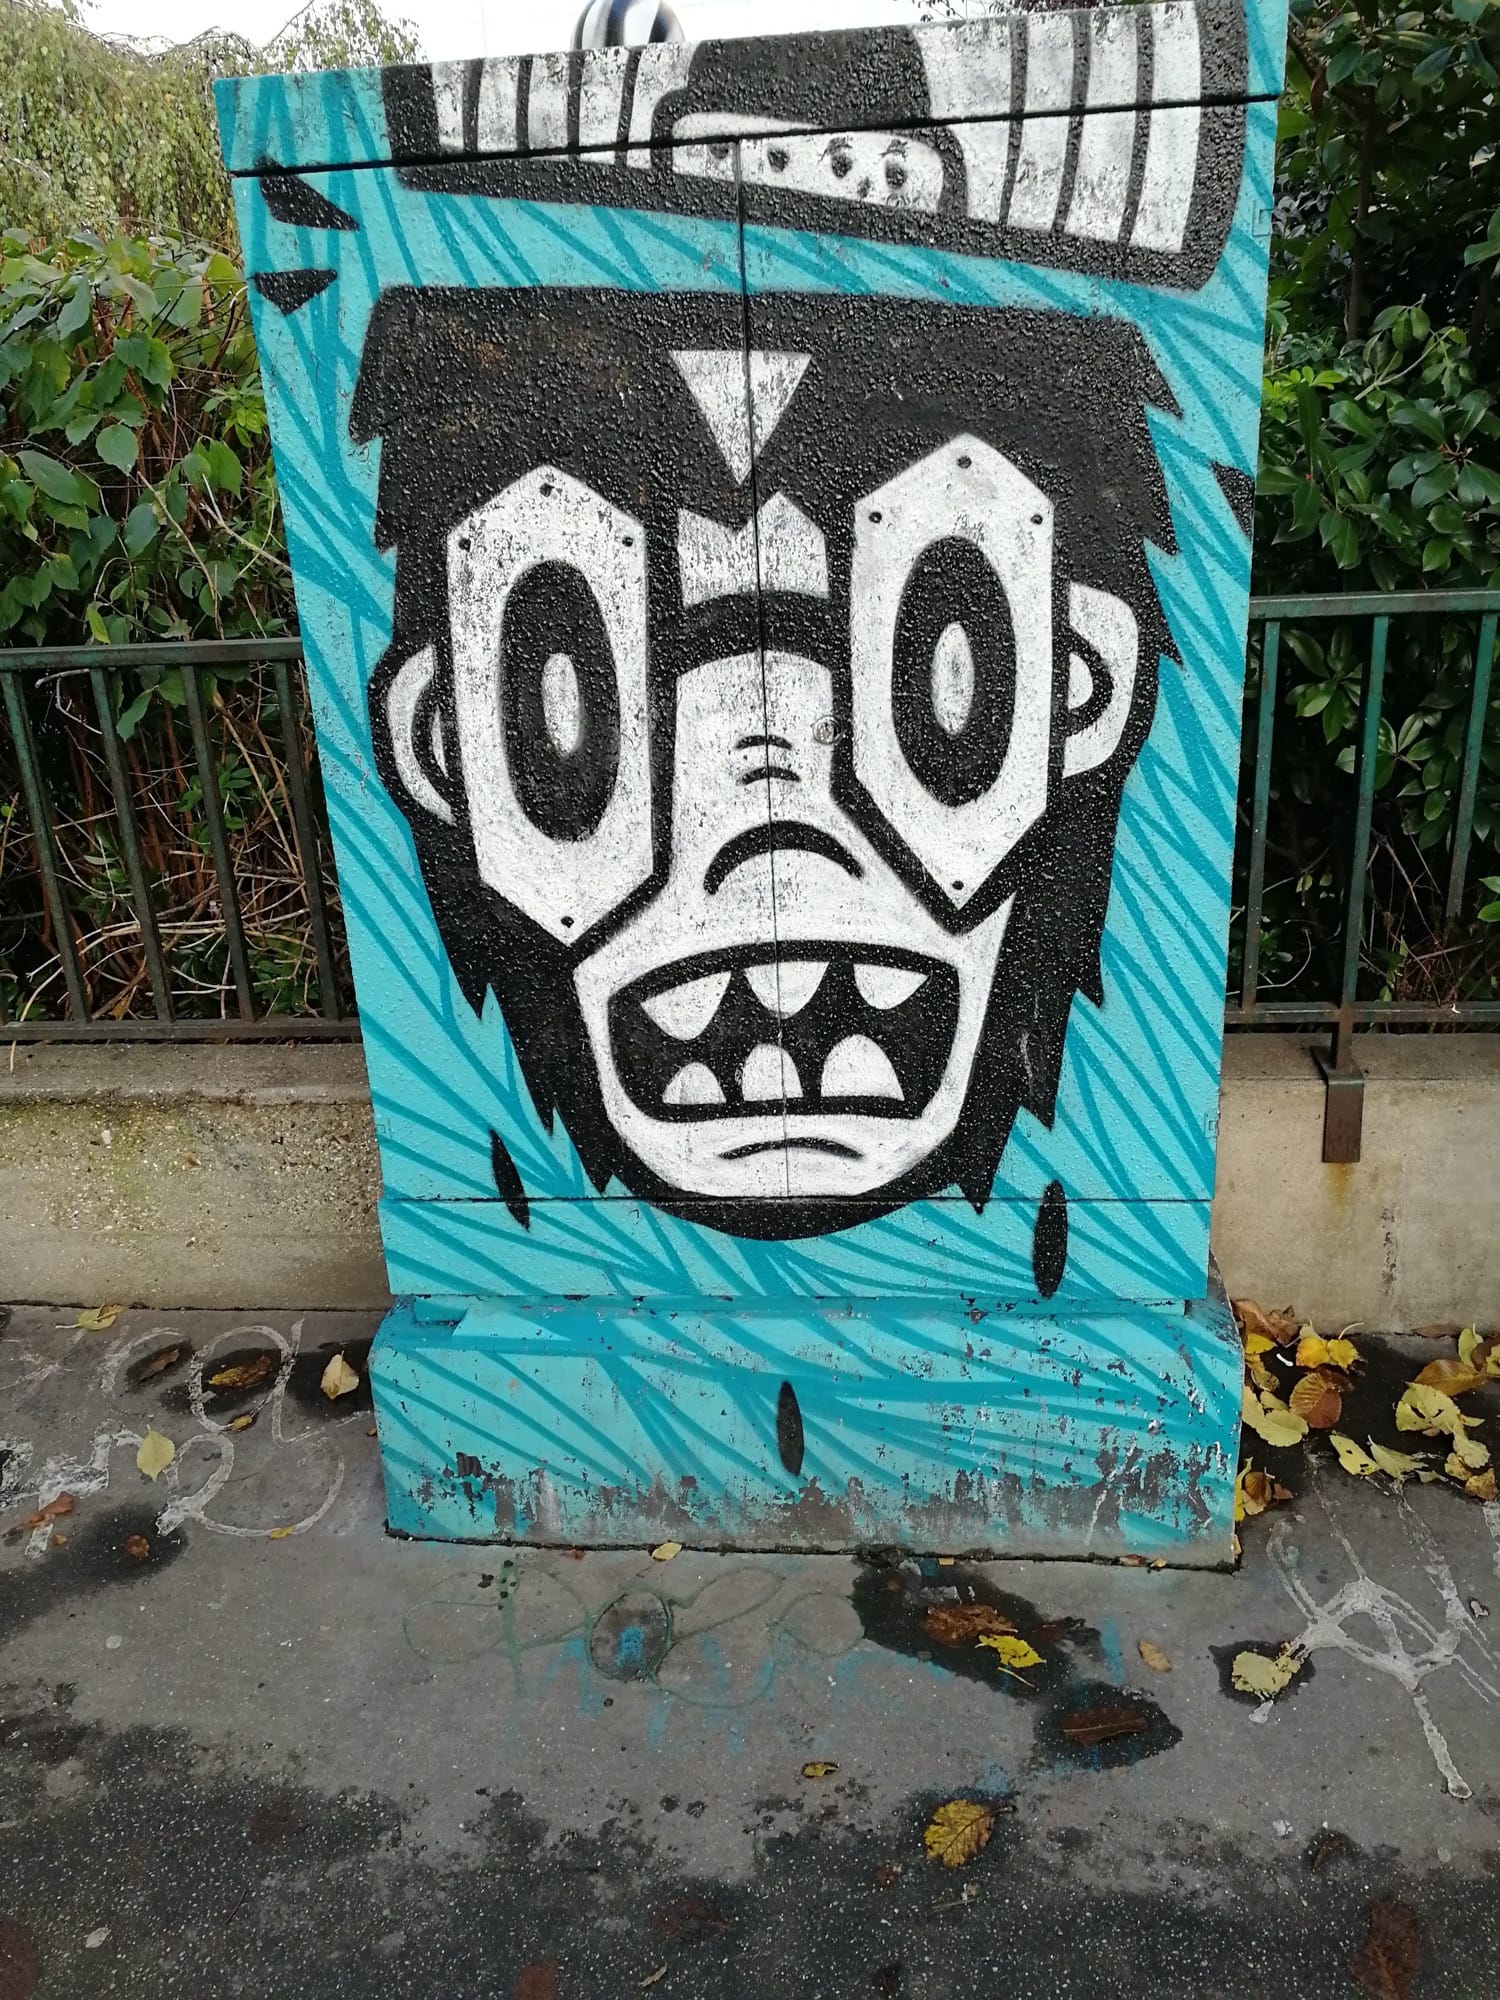 Graffiti 3242  captured by Rabot in Paris France